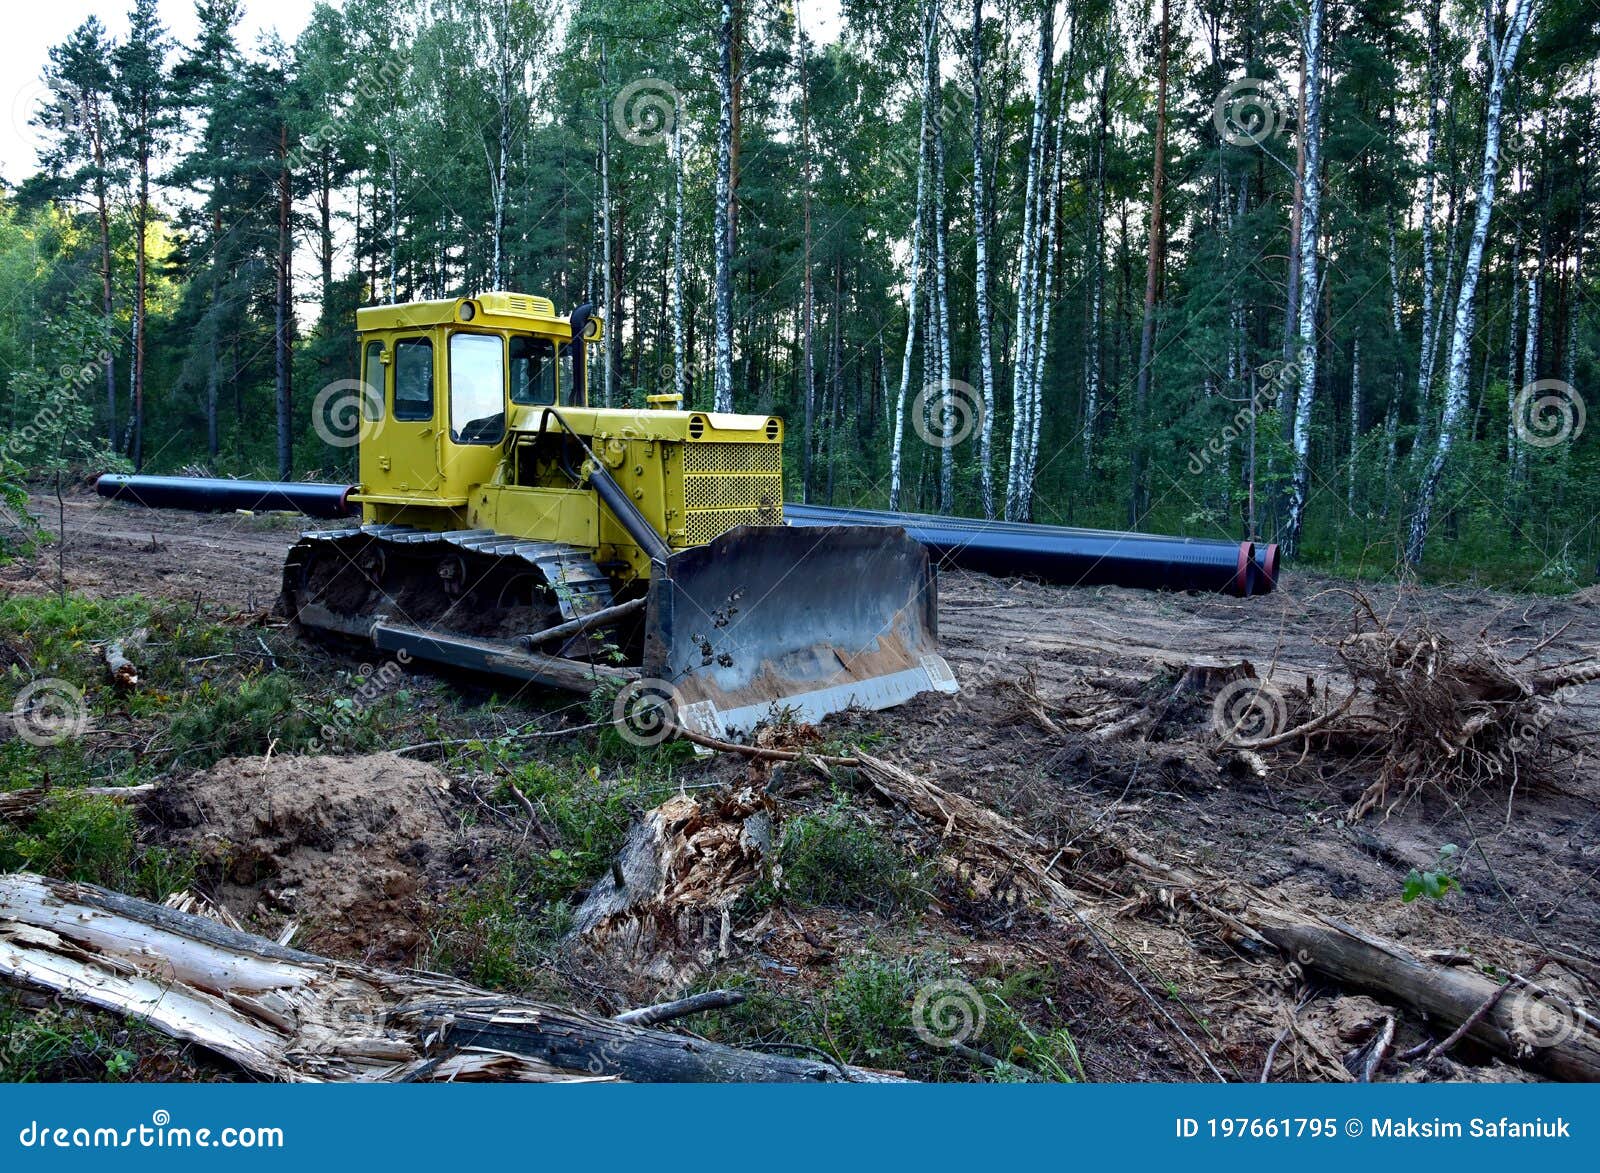 Dozer Earthwork for Laying Crude Oil Natural Gas Pipeline in Forest Area. Petrochemical Pipe. Track-type Stock - Image of contractor, people: 197661795